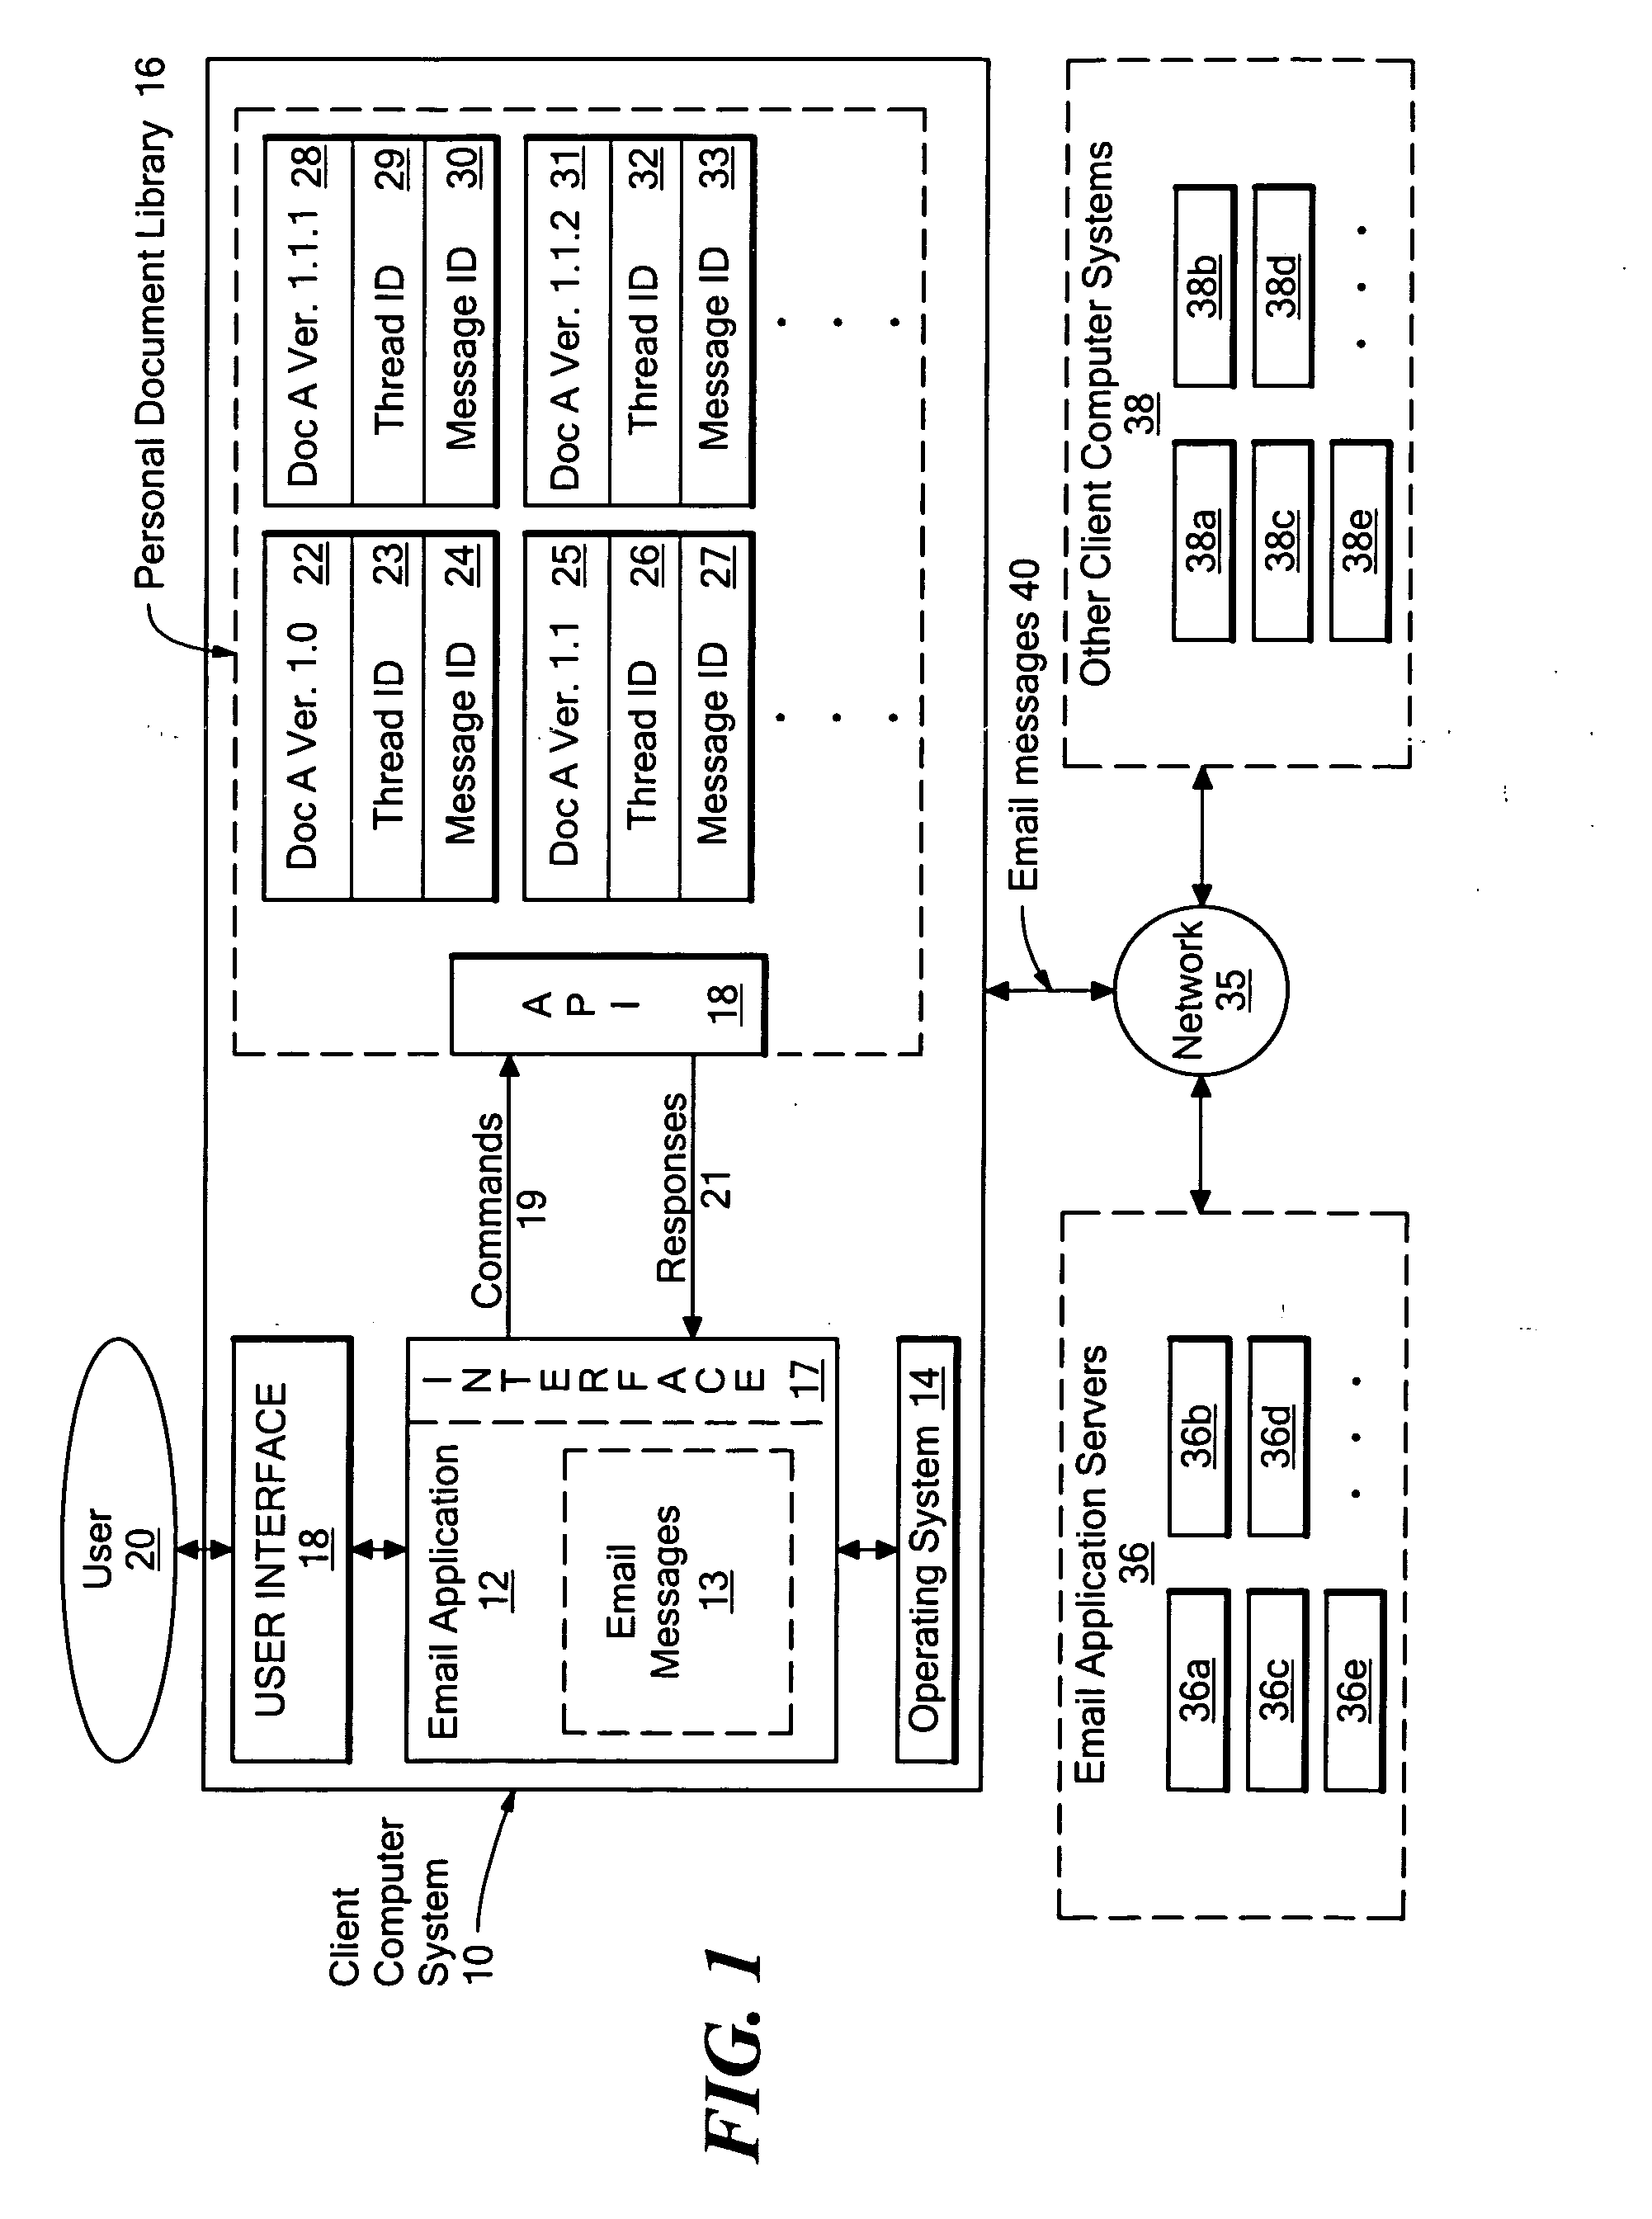 Method and system for providing version control for electronic mail attachments